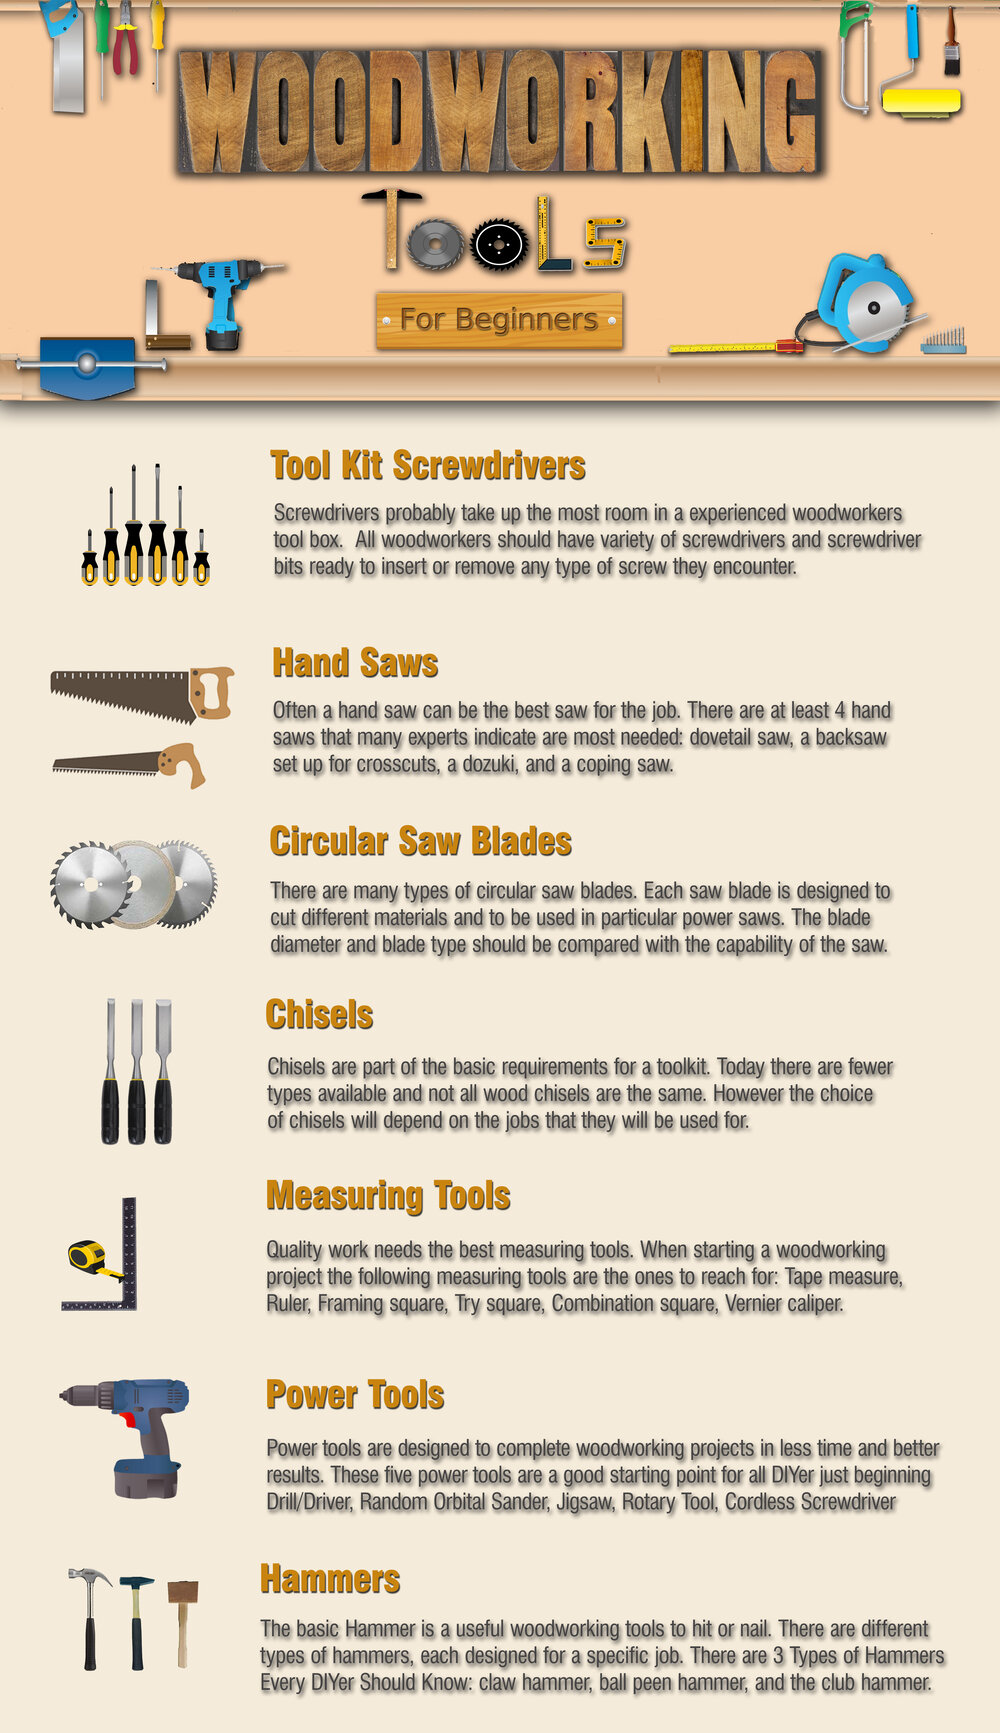 Woodworking Tools For Beginners, Cabinet Making Tools For Beginners